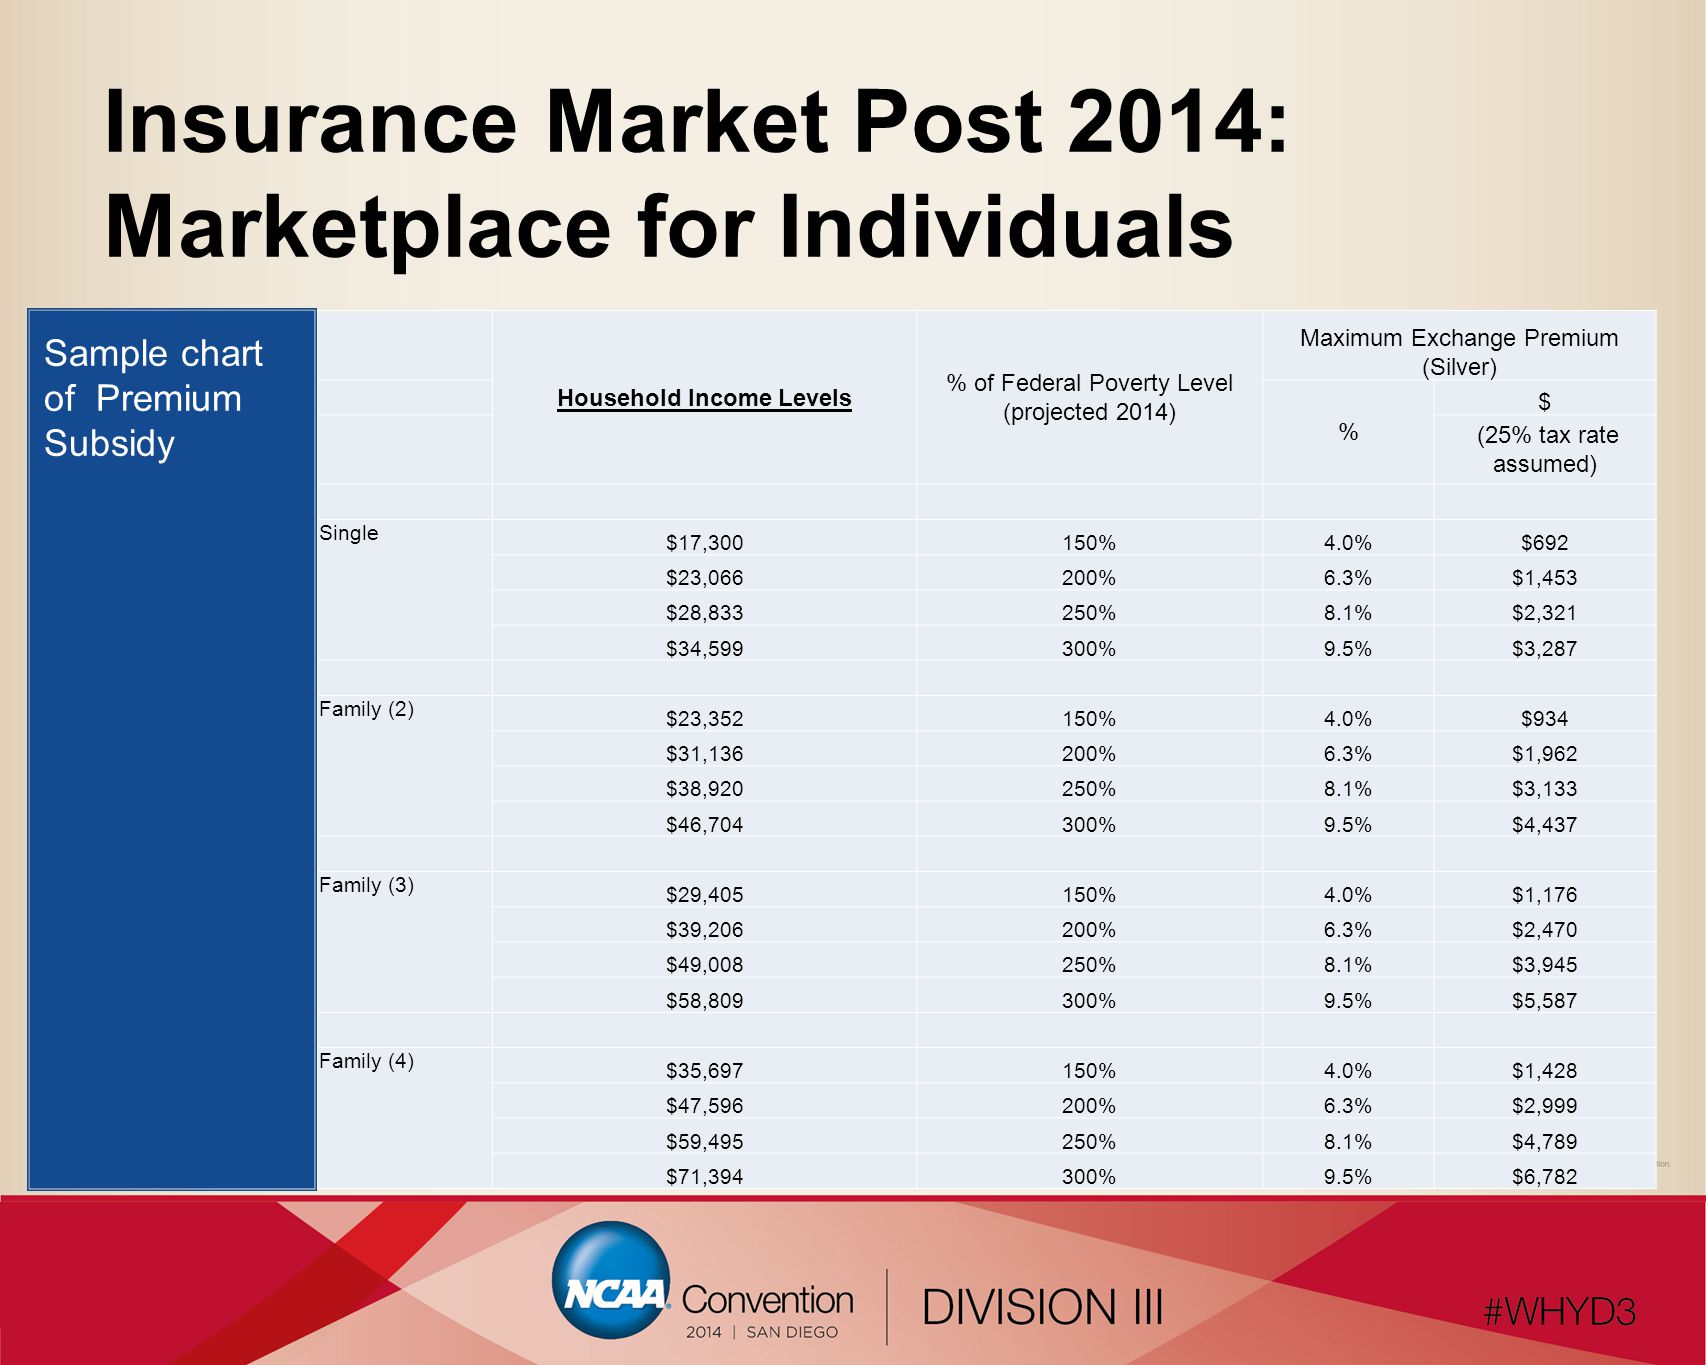 Insurance Market Post 2014: Marketplace for Individuals Household Income Levels % of Federal Poverty Level (projected 2014) Maximum Exchange Premium (Silver) % $ (25% tax rate assumed) Single $17,300150%4.0%$692 $23,066200%6.3%$1,453 $28,833250%8.1%$2,321 $34,599300%9.5%$3,287 Family (2) $23,352150%4.0%$934 $31,136200%6.3%$1,962 $38,920250%8.1%$3,133 $46,704300%9.5%$4,437 Family (3) $29,405150%4.0%$1,176 $39,206200%6.3%$2,470 $49,008250%8.1%$3,945 $58,809300%9.5%$5,587 Family (4) $35,697150%4.0%$1,428 $47,596200%6.3%$2,999 $59,495250%8.1%$4,789 $71,394300%9.5%$6,782 Sample chart of Premium Subsidy